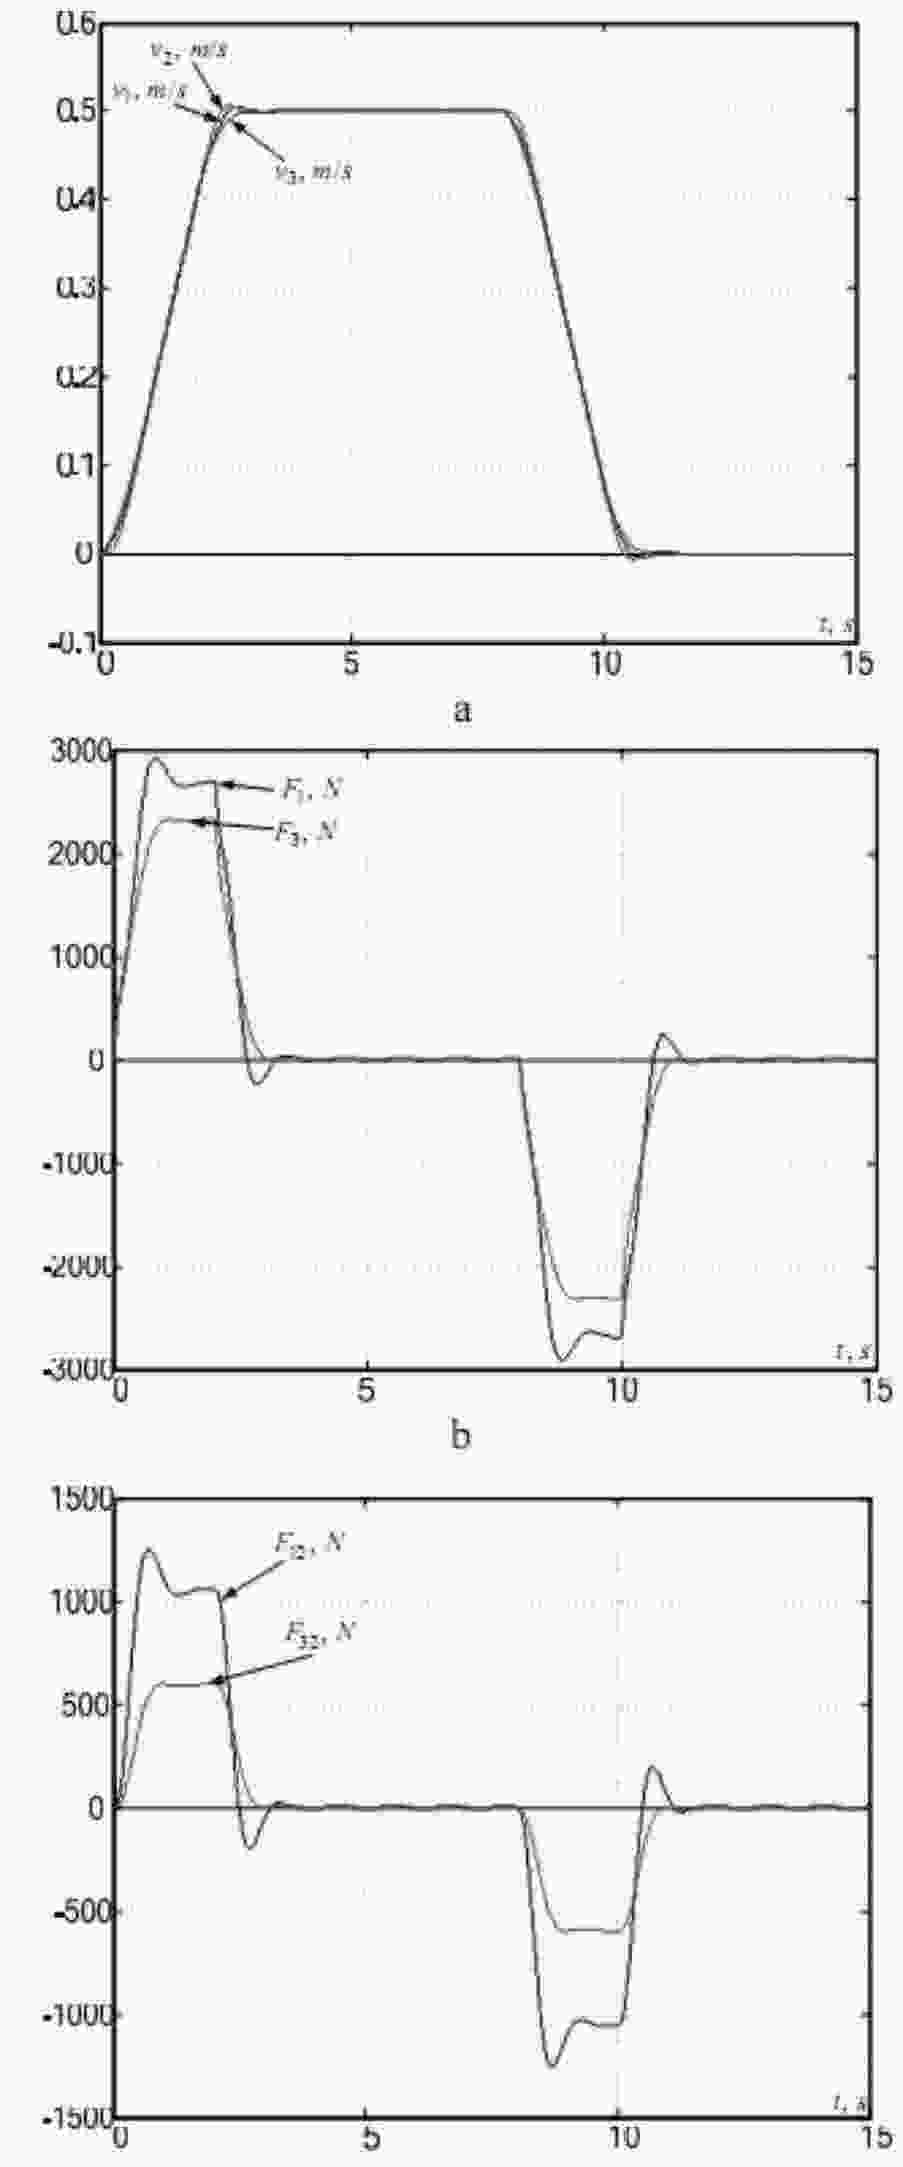 Simulation results of a cascade control
system designed in terms of magnitude optimum with additional feedbacks:
(a) – velocities of lumped masses; (b) – driving forces; (c) – elastic forces